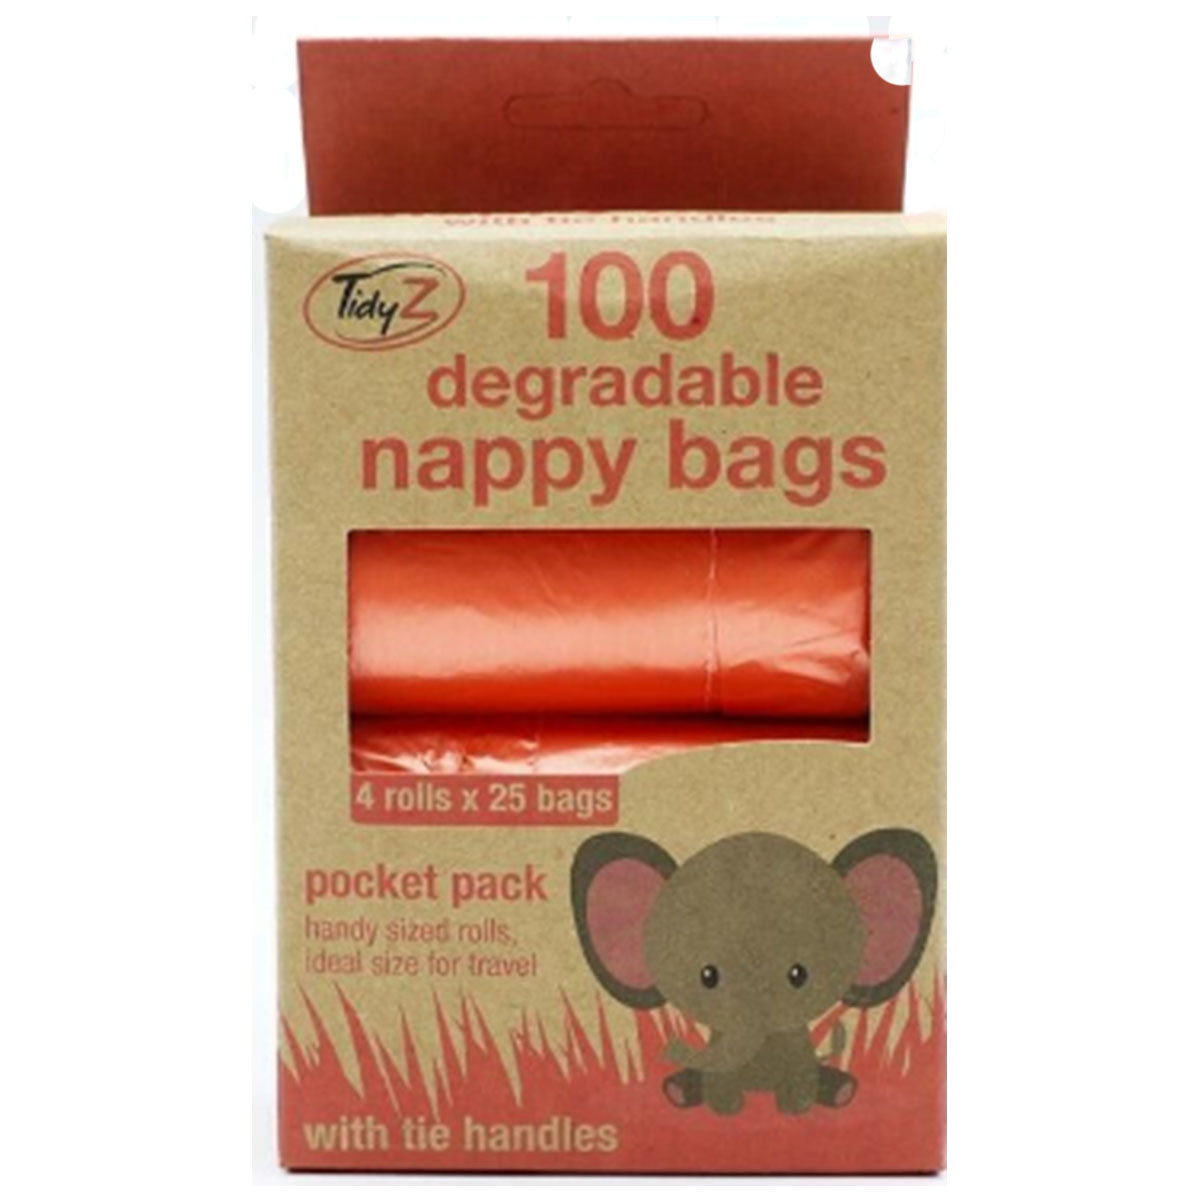 Tidyz - Degradable Pocket Pack Nappy Bags Pack - 100pcs - Continental Food Store